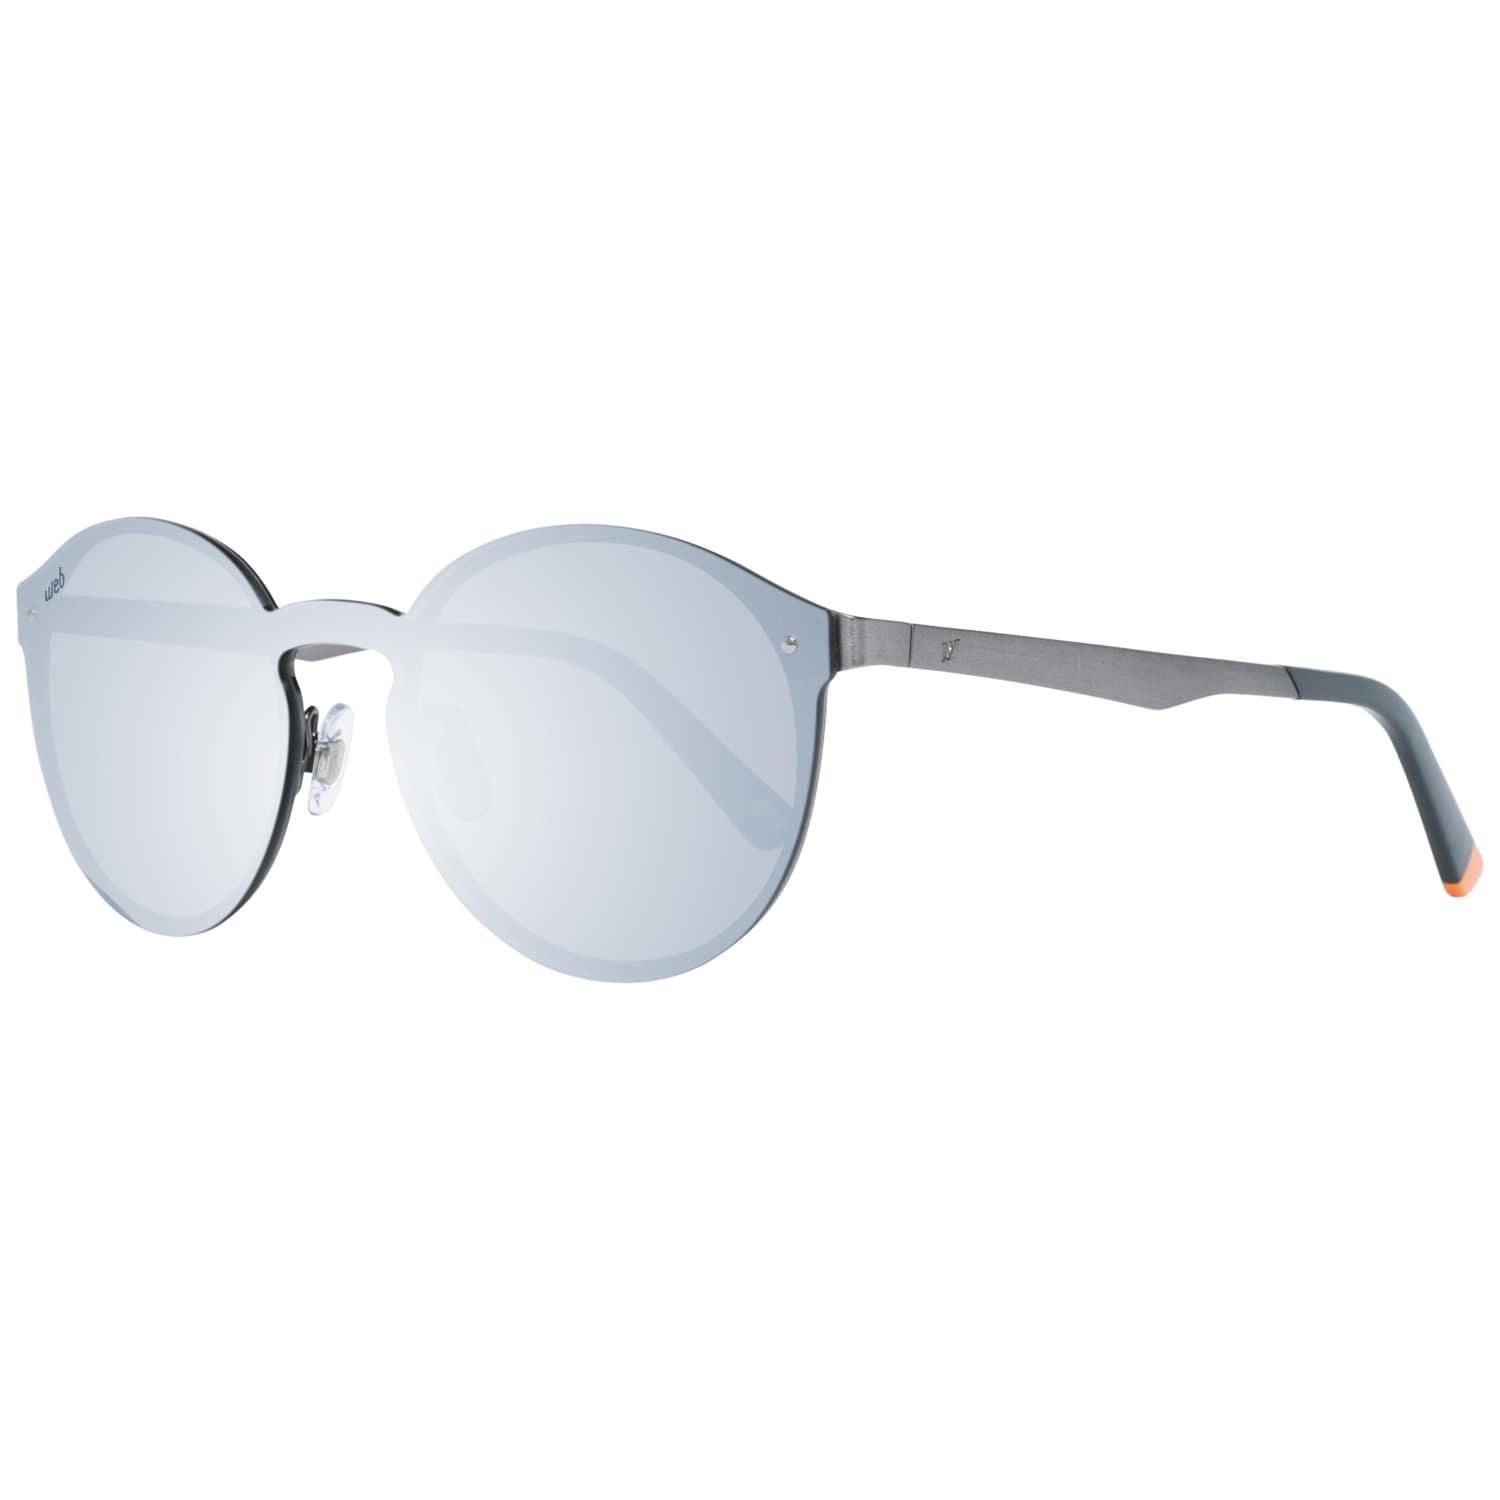 Details
MATERIAL: Metal
COLOR: Gray
MODEL: WE0203 0009C
GENDER: Adult Unisex
COUNTRY OF MANUFACTURE: China
TYPE: Sunglasses
ORIGINAL CASE?: Yes
STYLE: Mono Lens
OCCASION: Casual
FEATURES: Lightweight
LENS COLOR: Grey
LENS TECHNOLOGY: Mirrored
YEAR